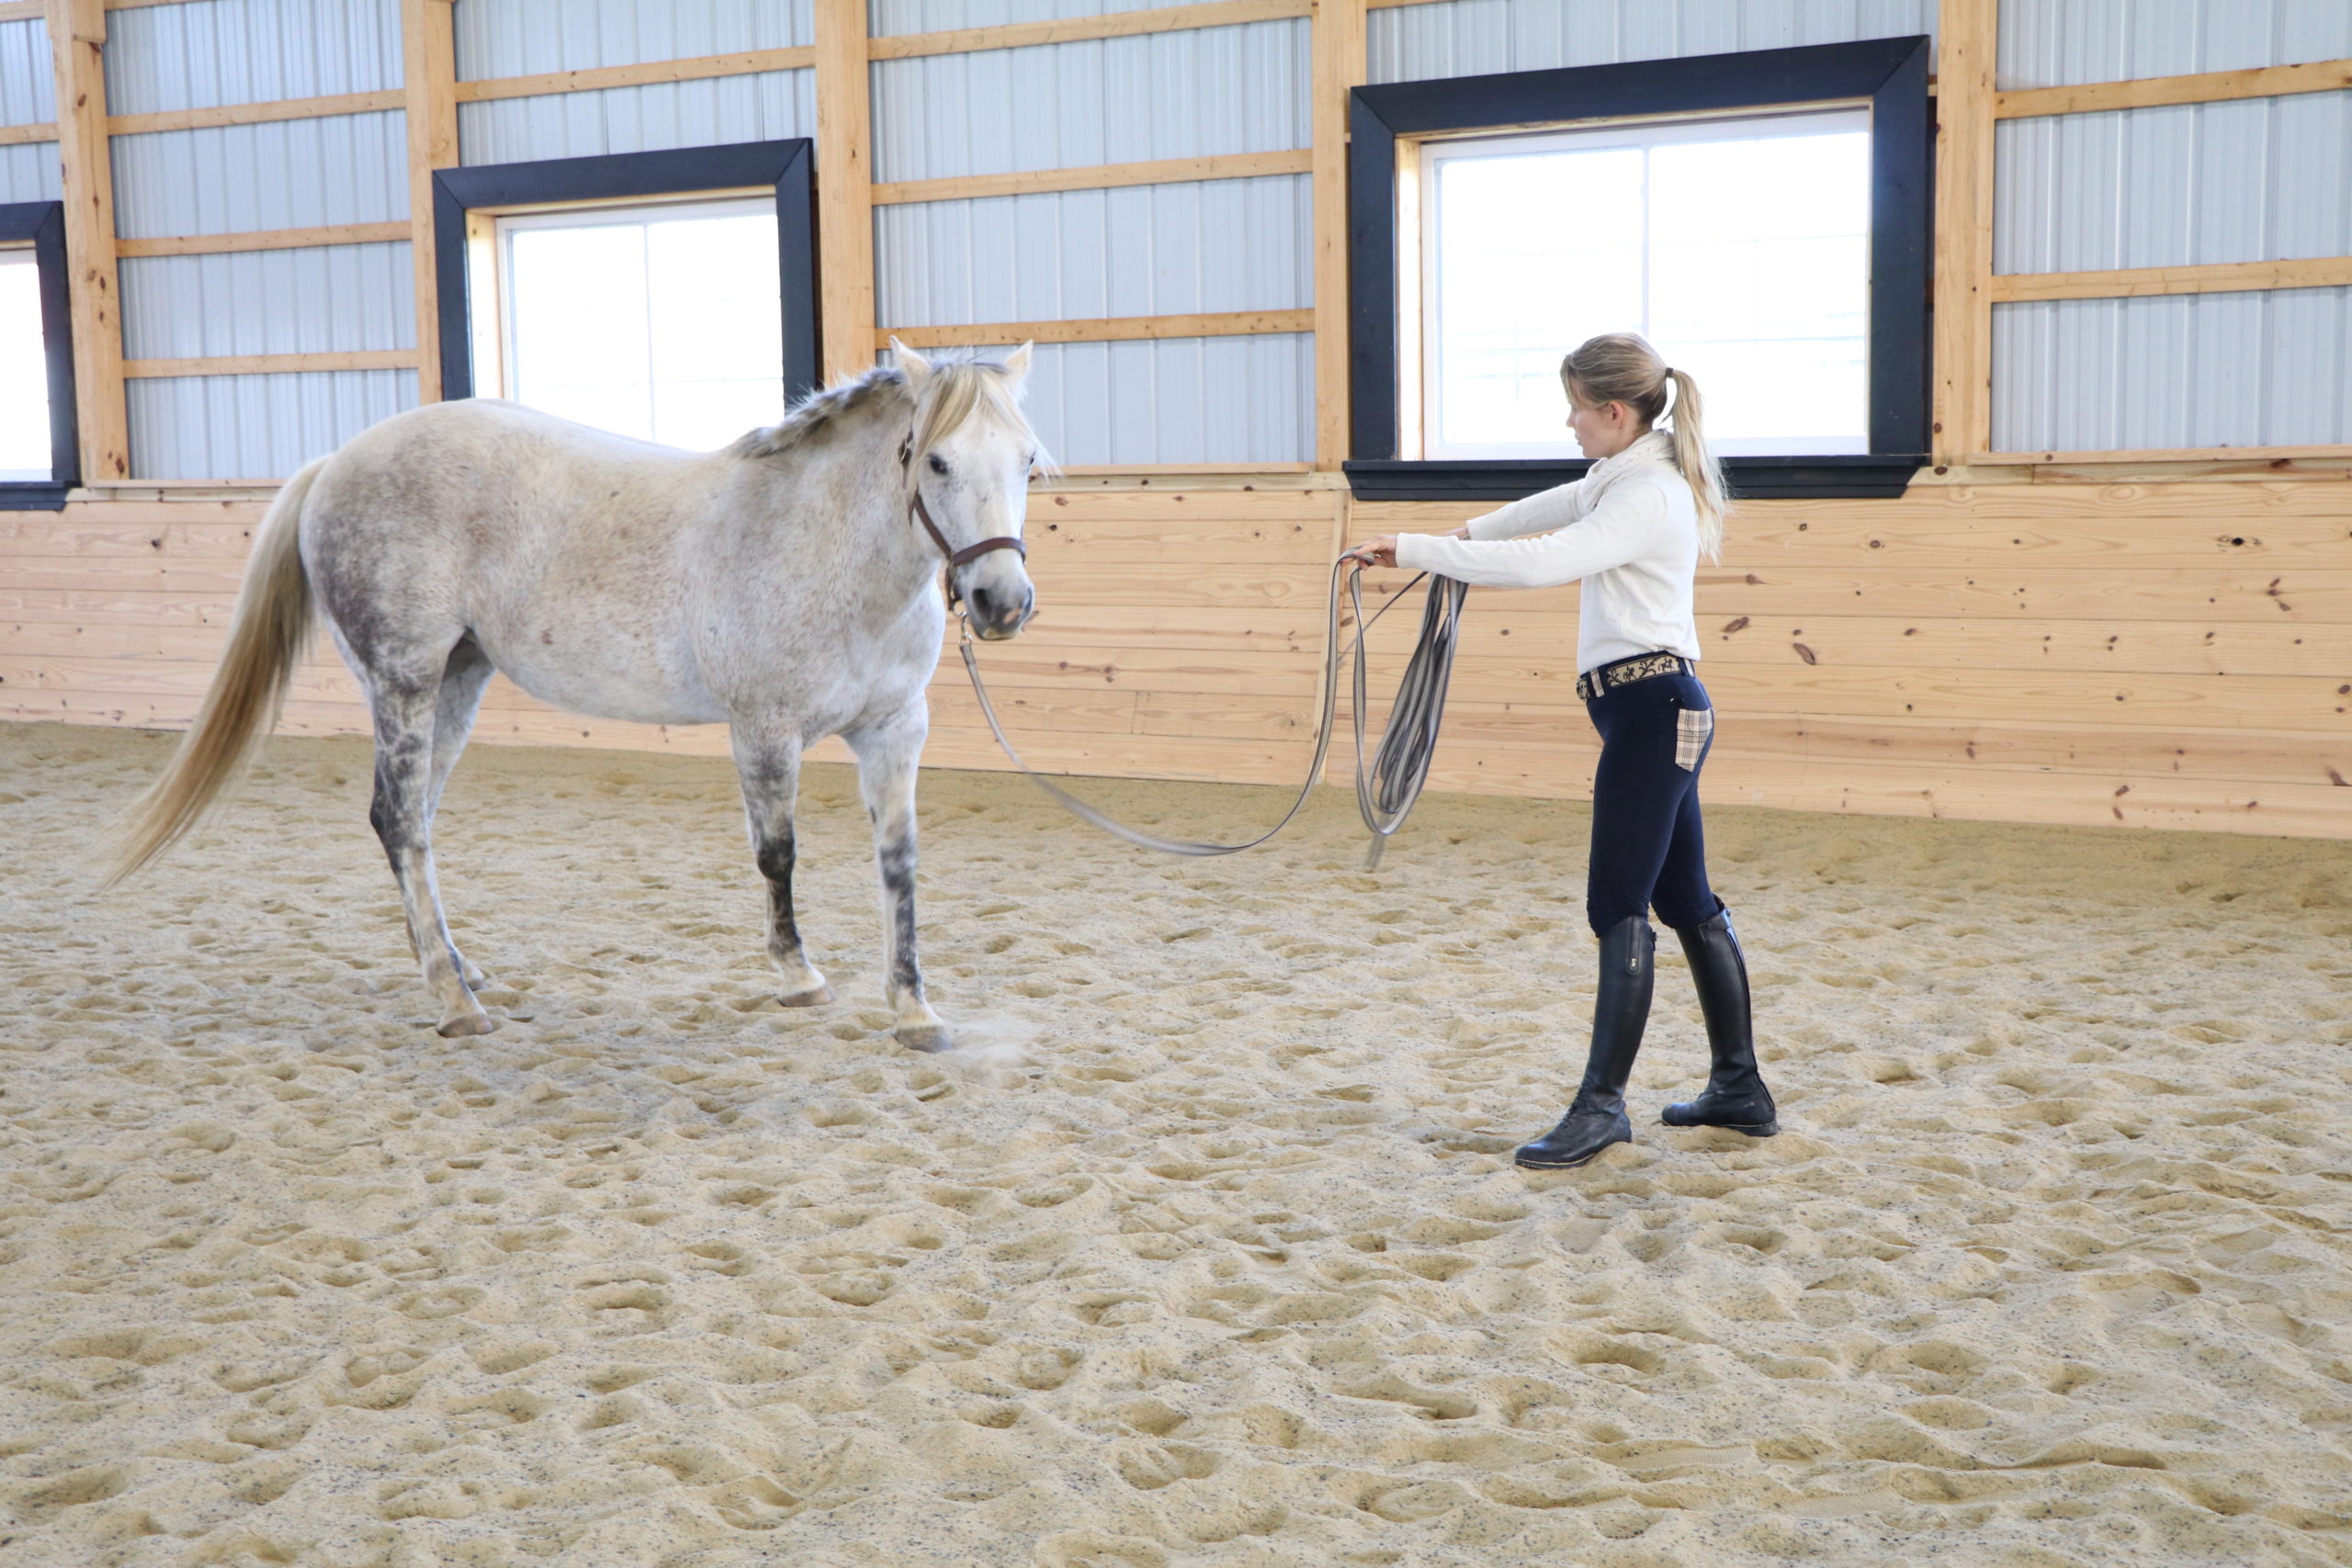 How to Change Directions While Lunging